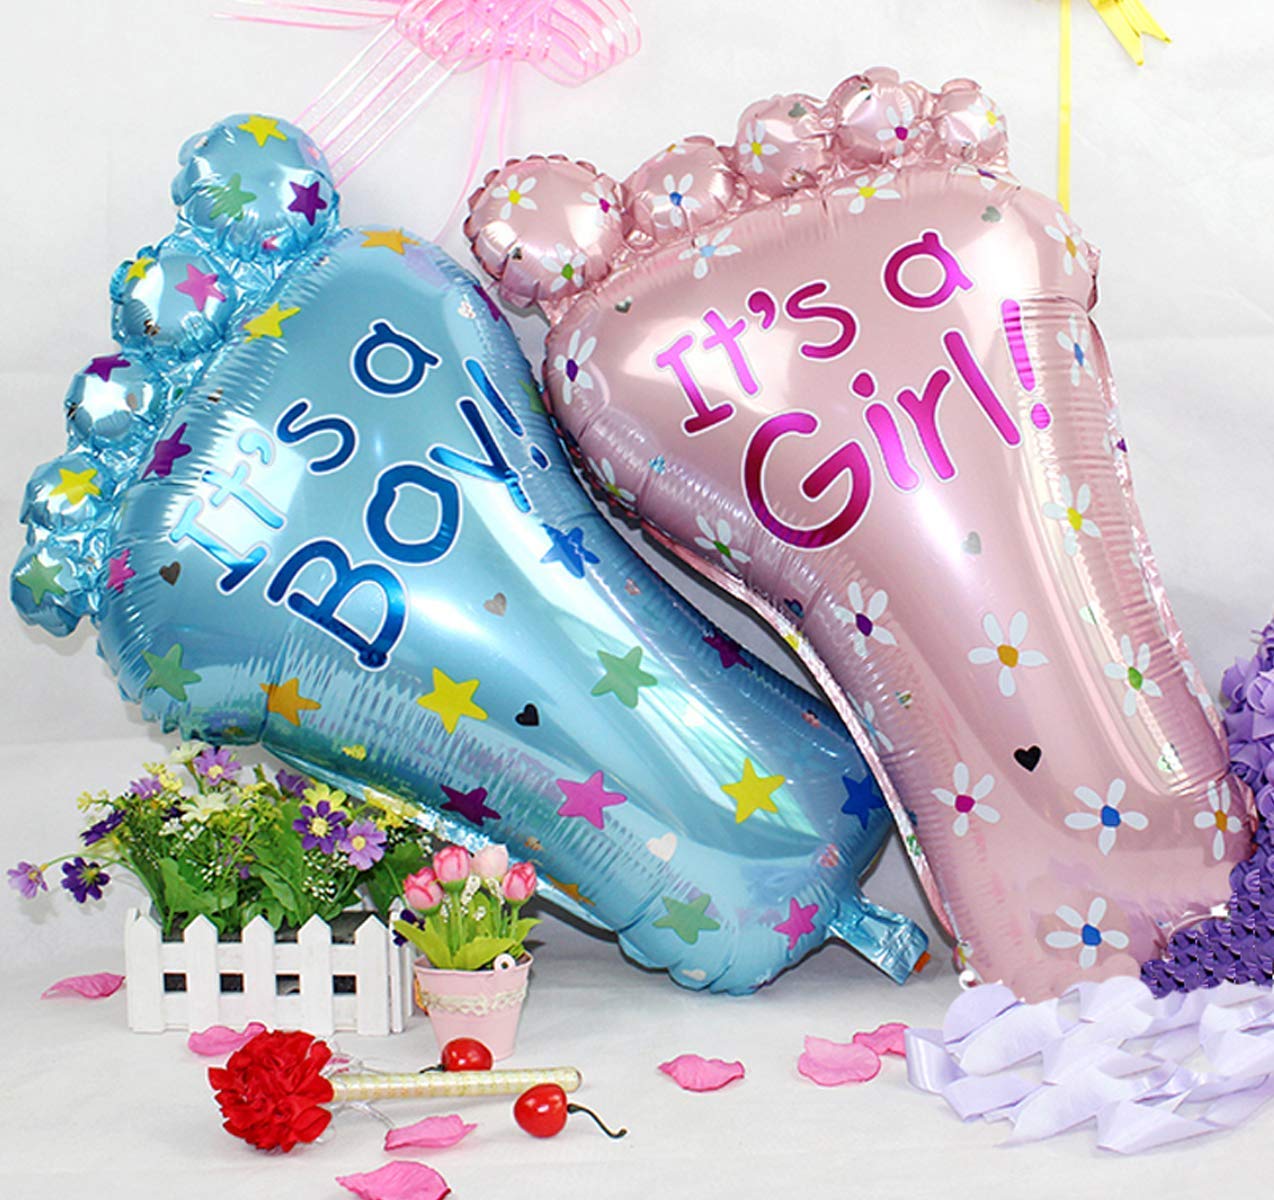 ITS A BOY OR GIRL BABY SHOWER FOOT BALLOONS ITS A GIRL BABY SHOWER FOOT BALLON 